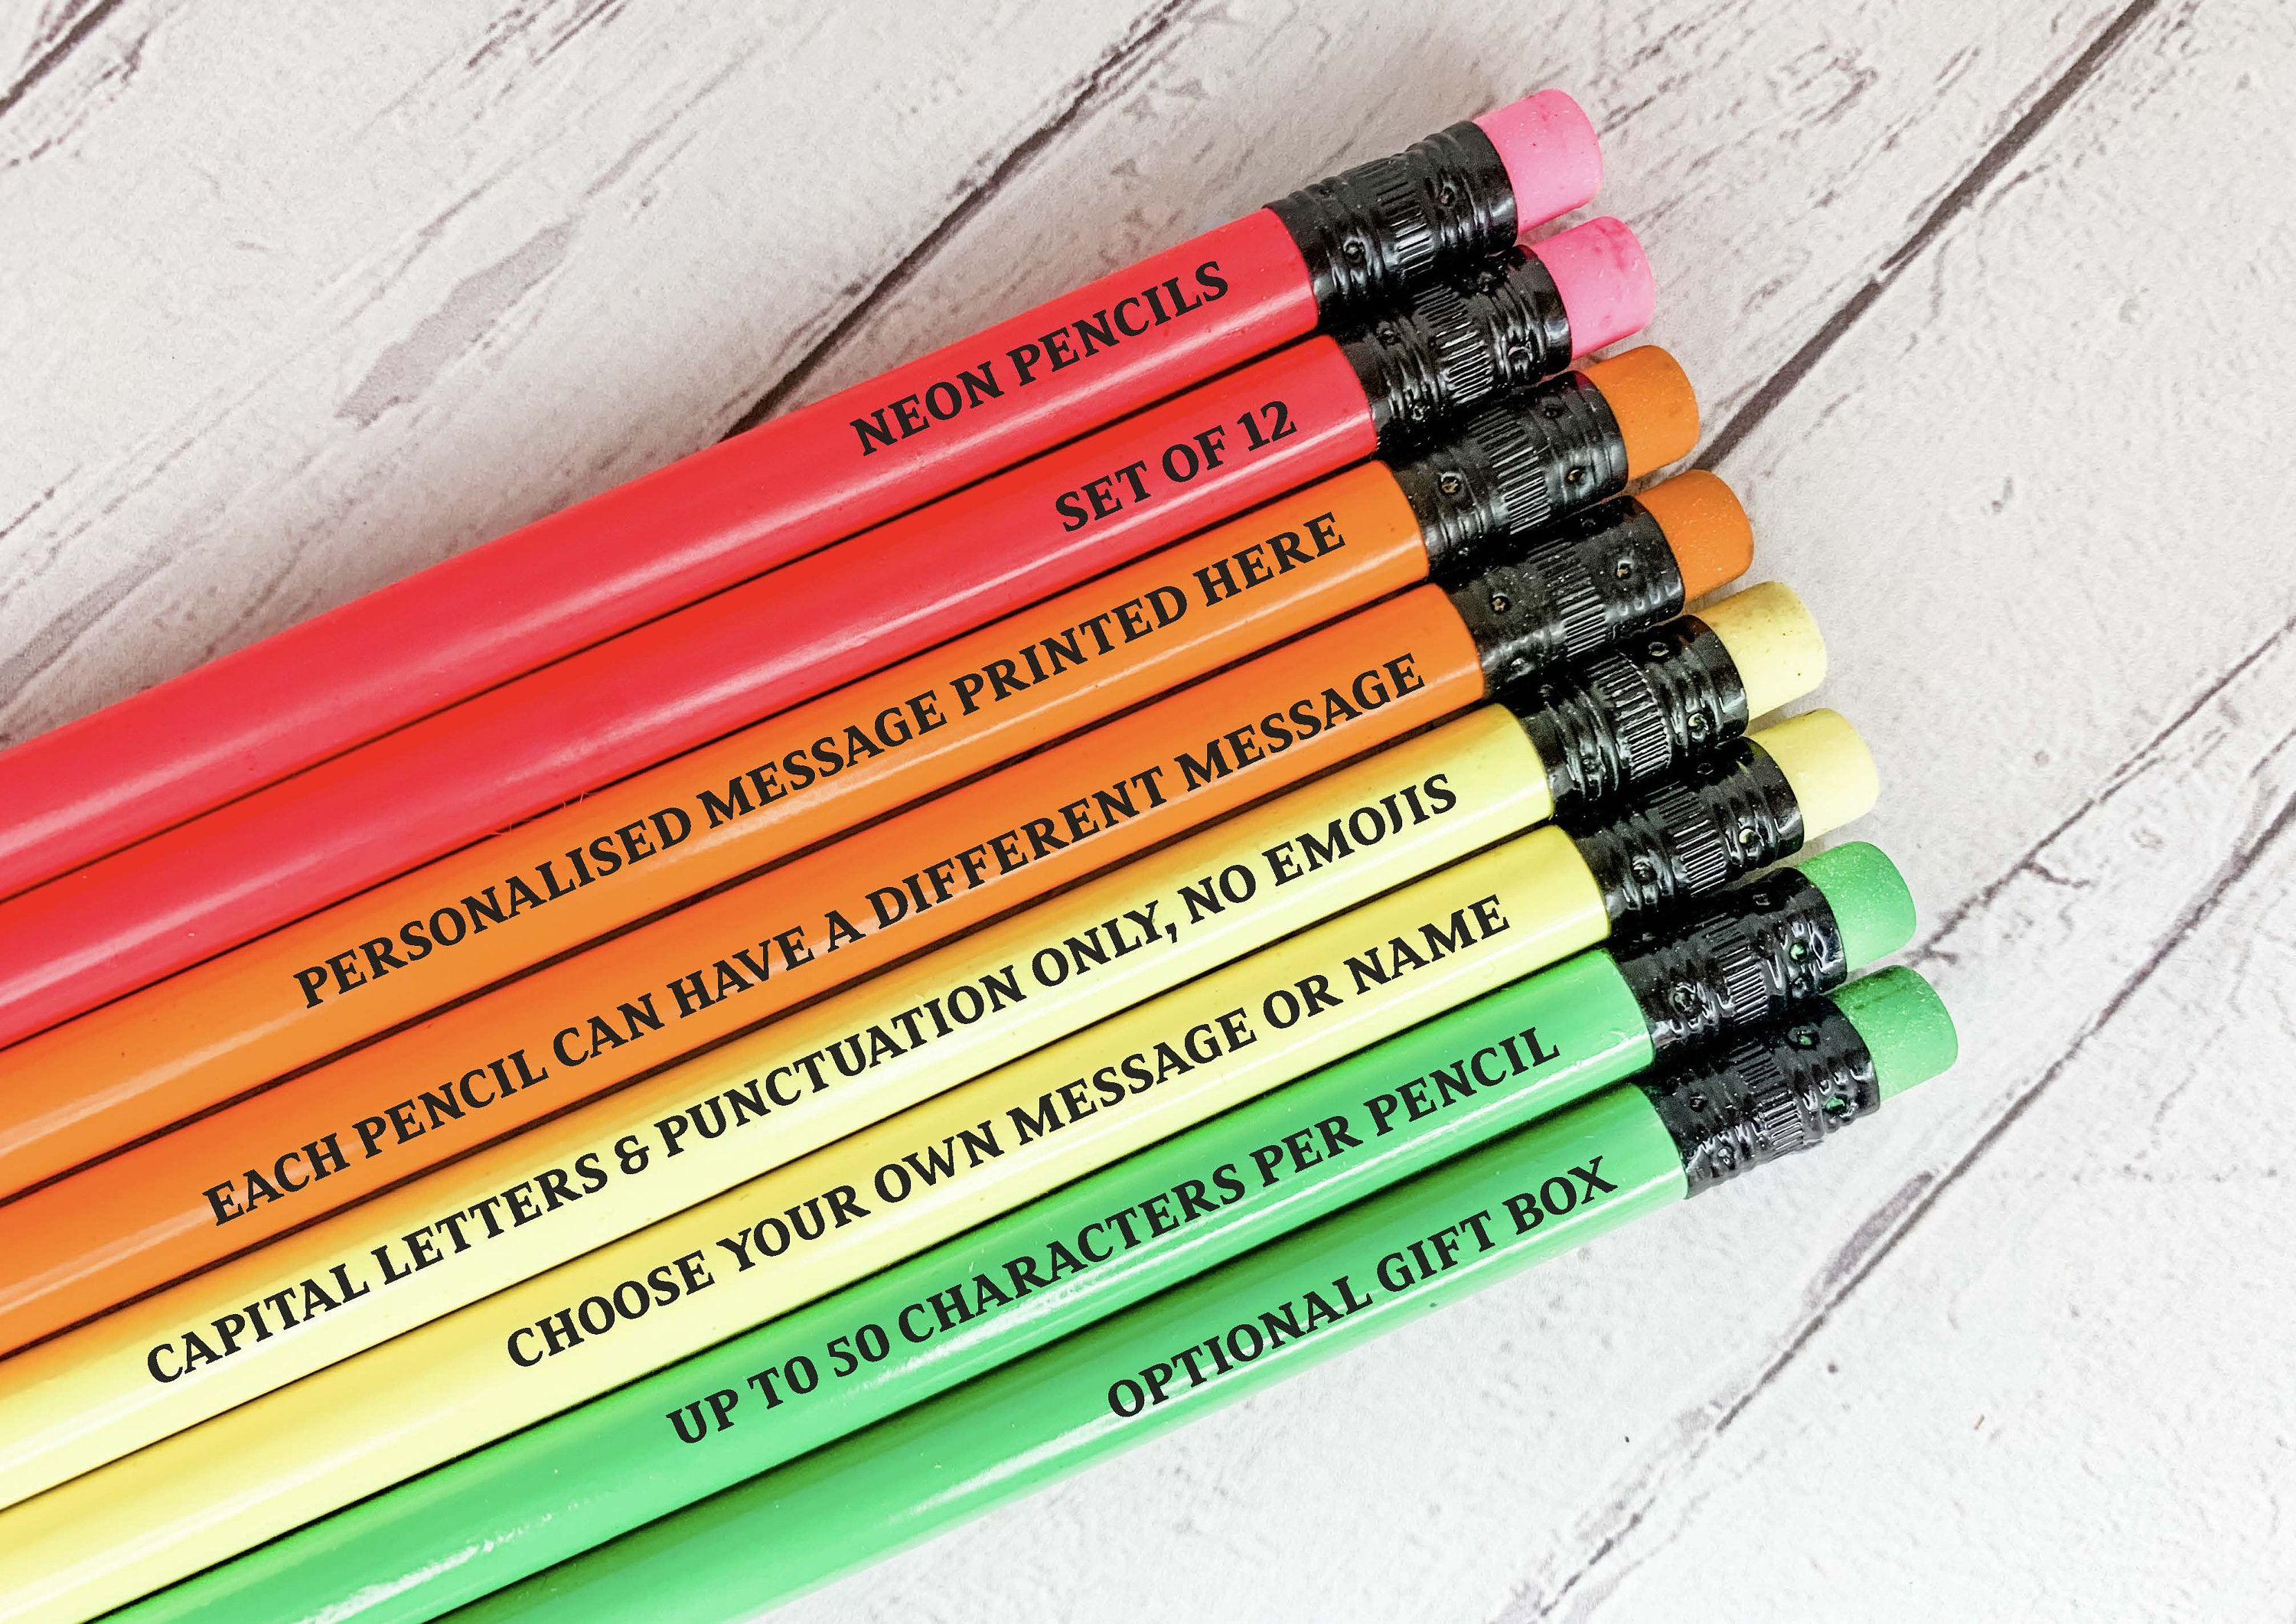 Neon Colored Pencils, Set of 12